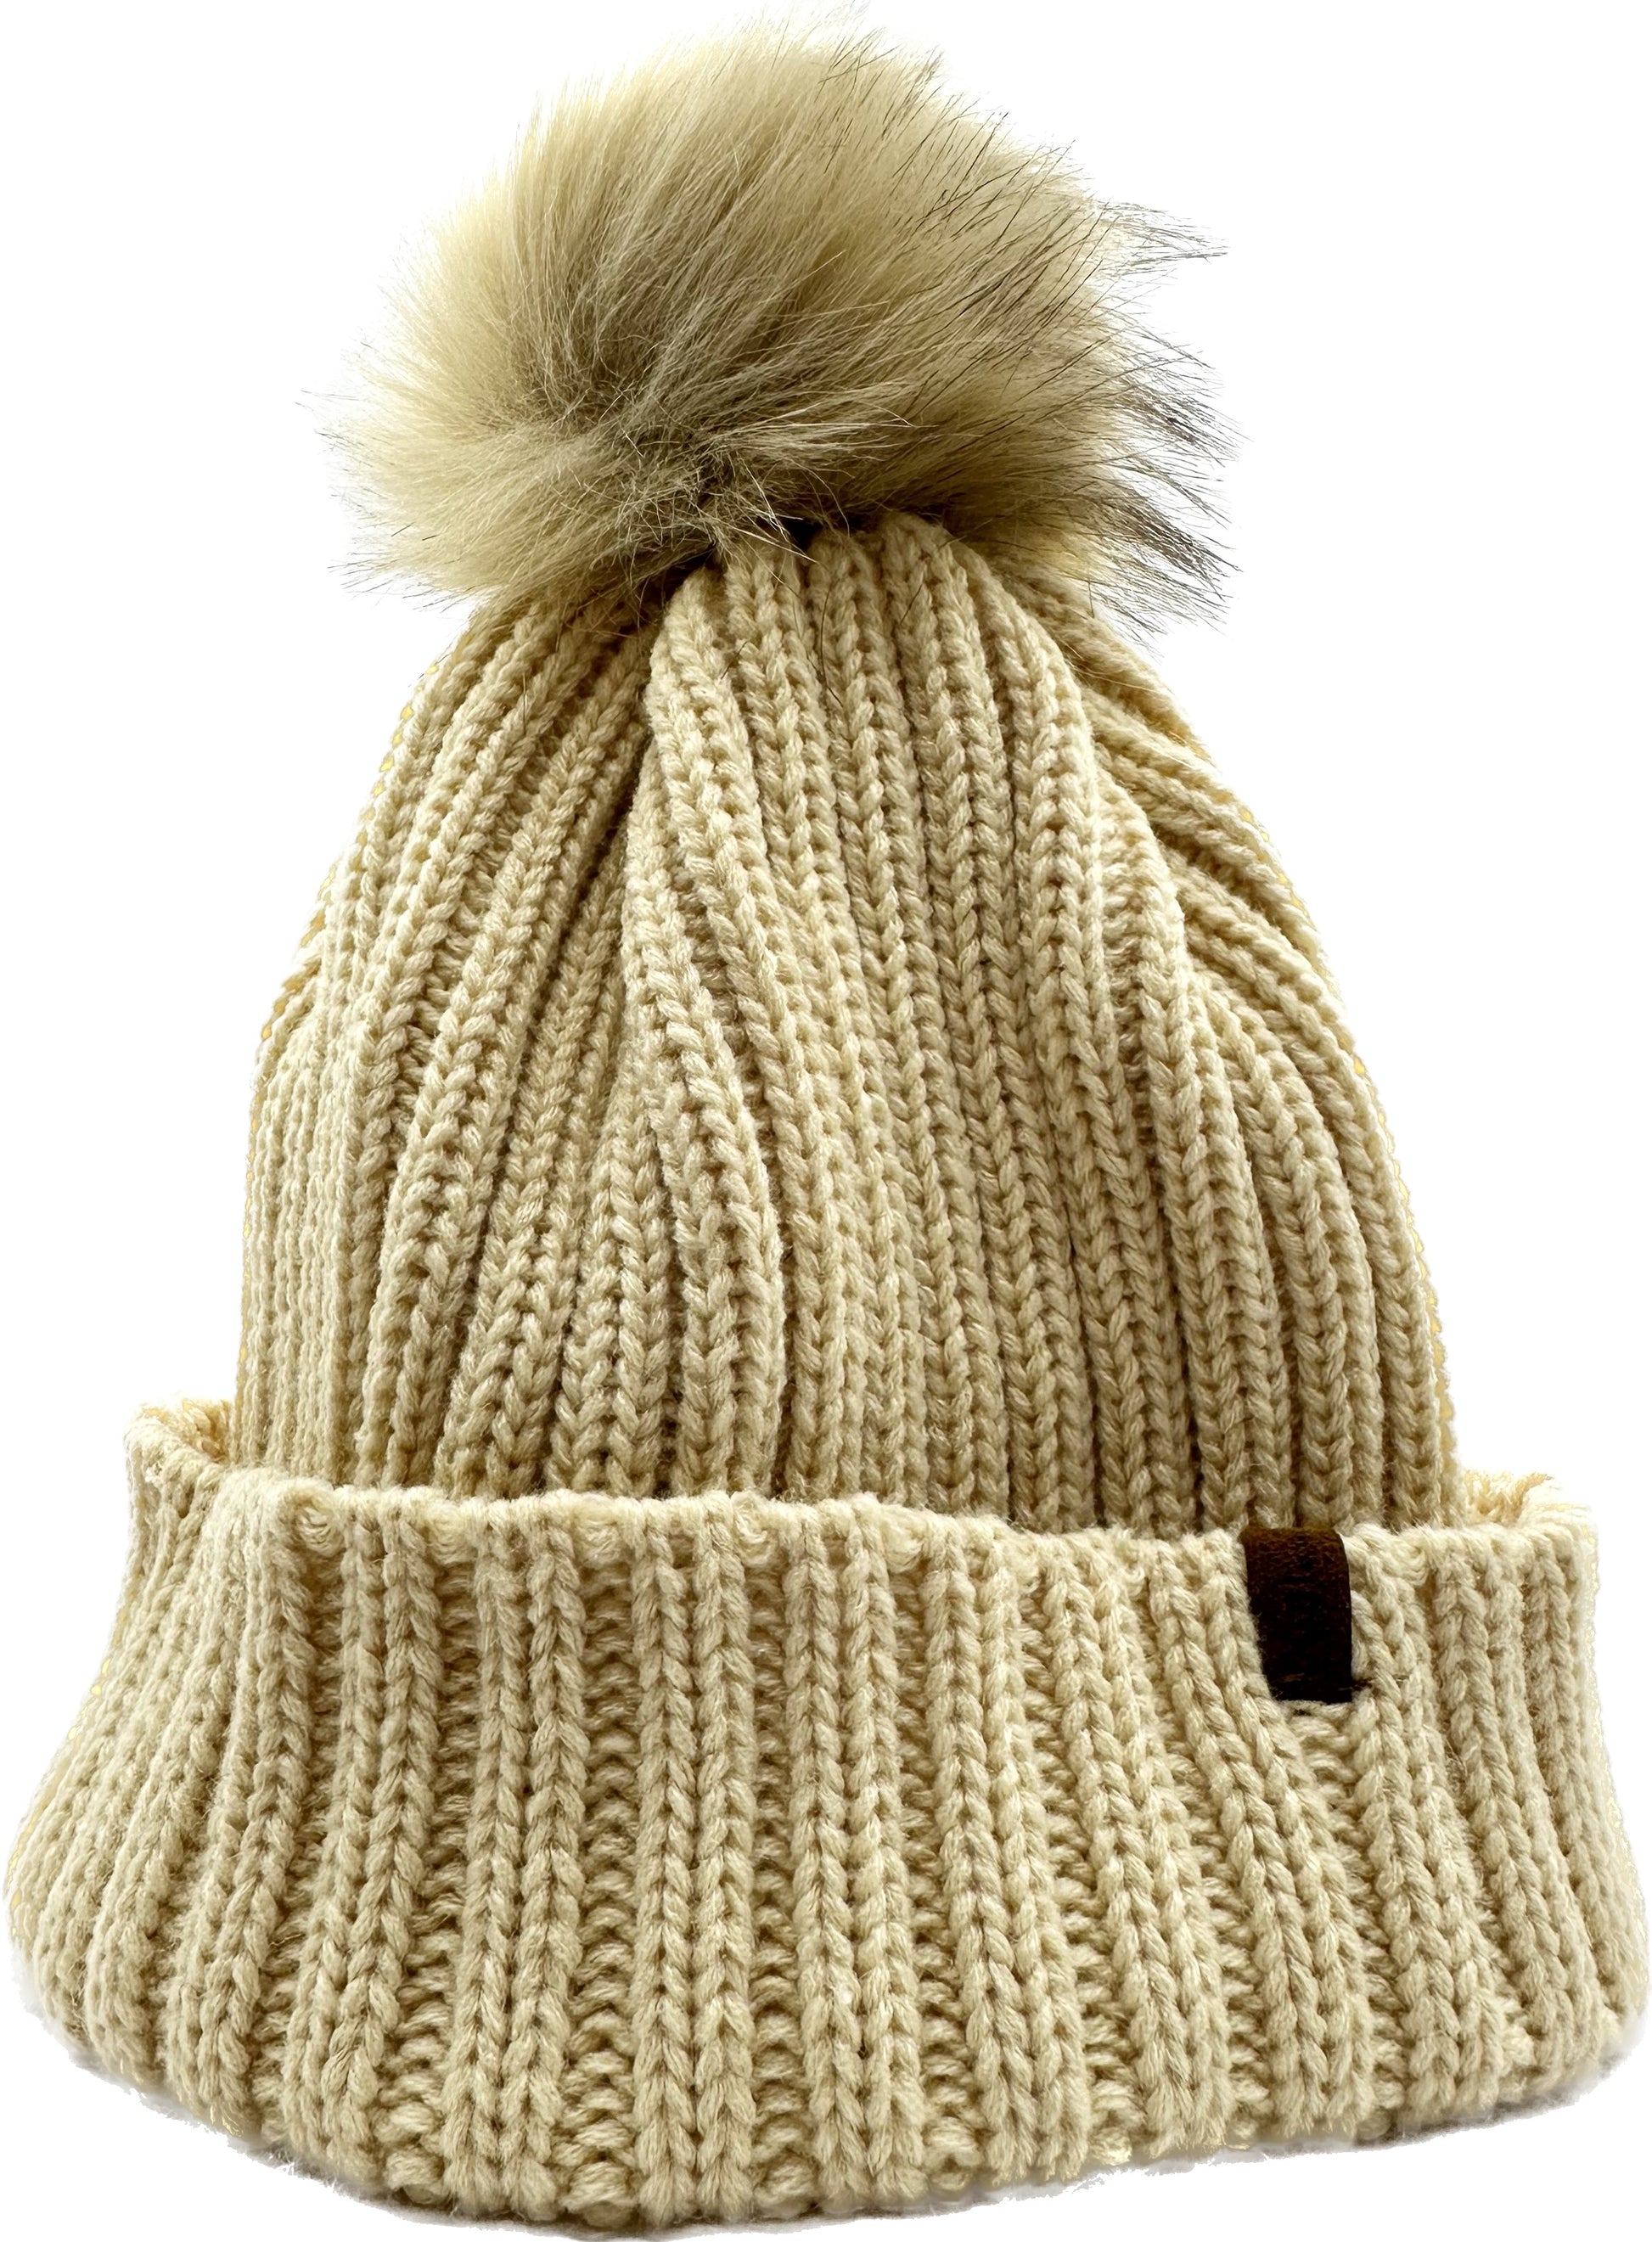 THE KNIT BEANIE IN CHAMPAGNE - COSI & co.